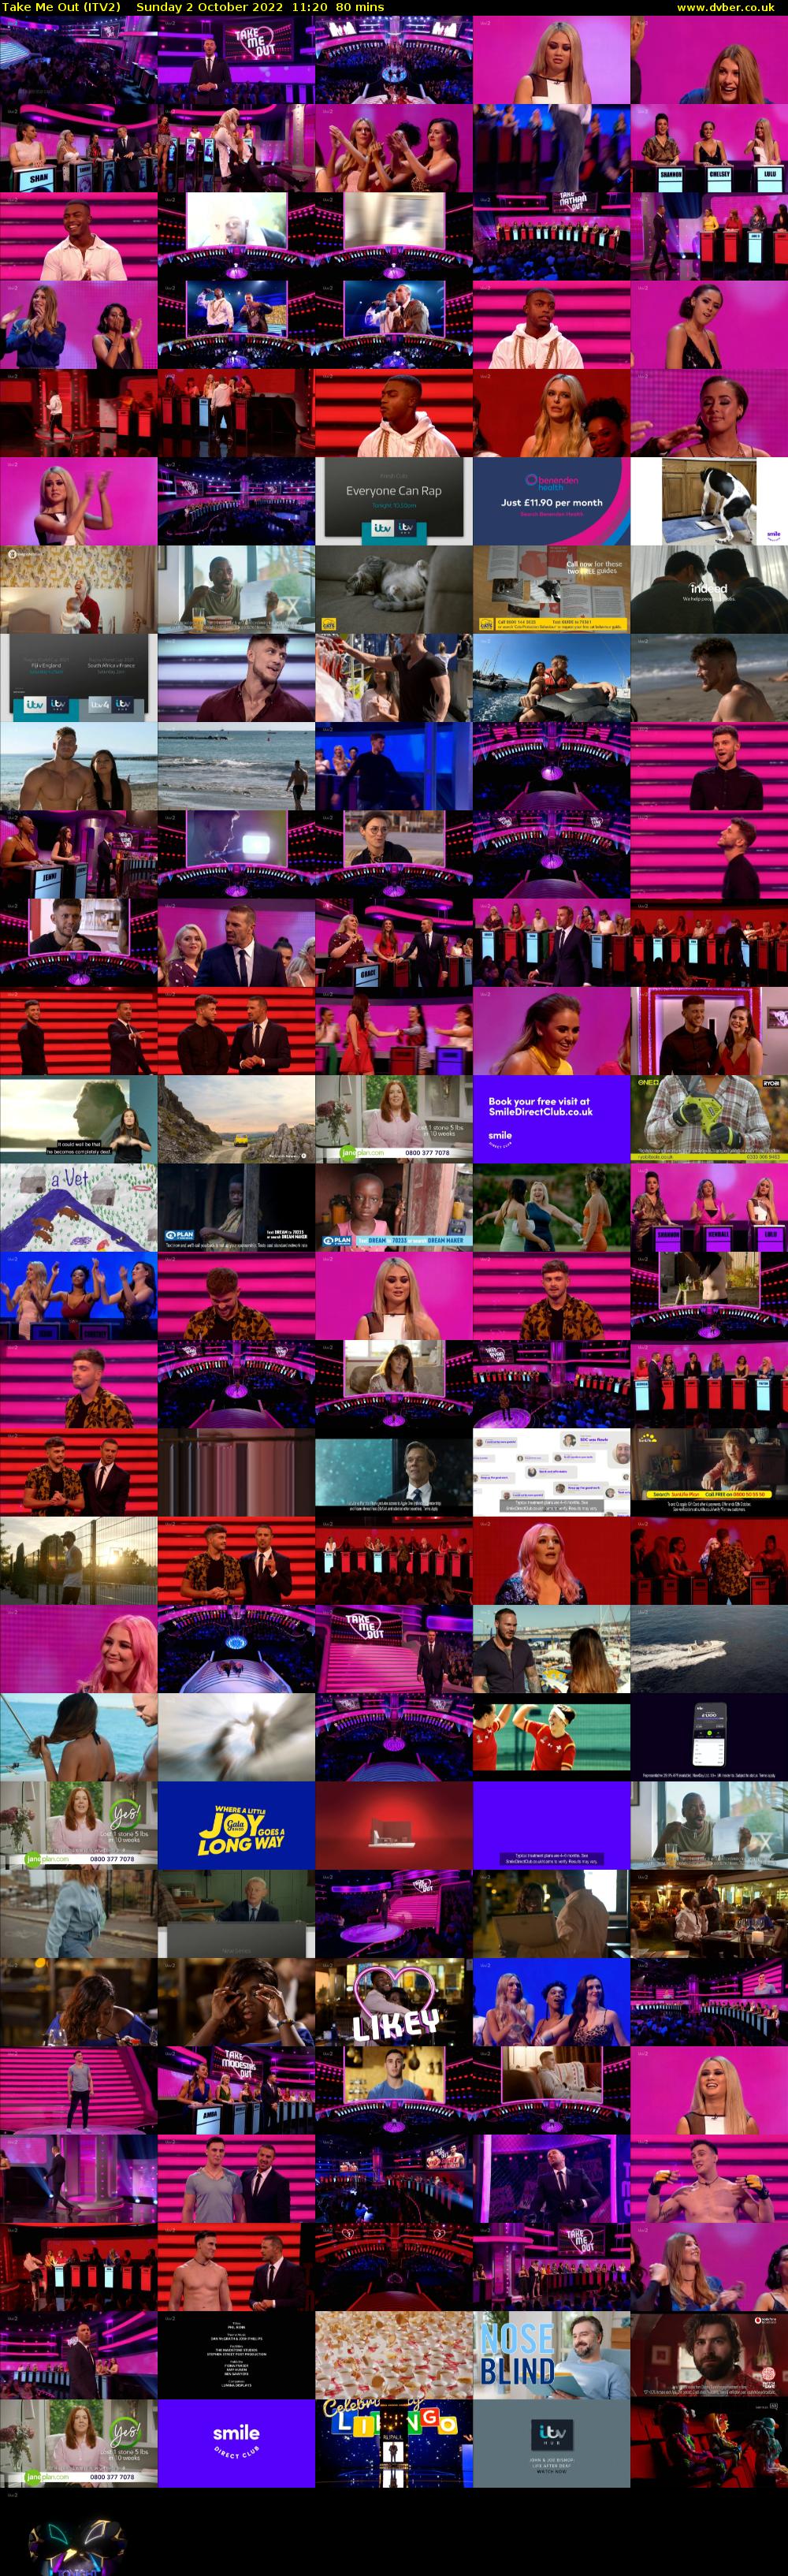 Take Me Out (ITV2) Sunday 2 October 2022 11:20 - 12:40